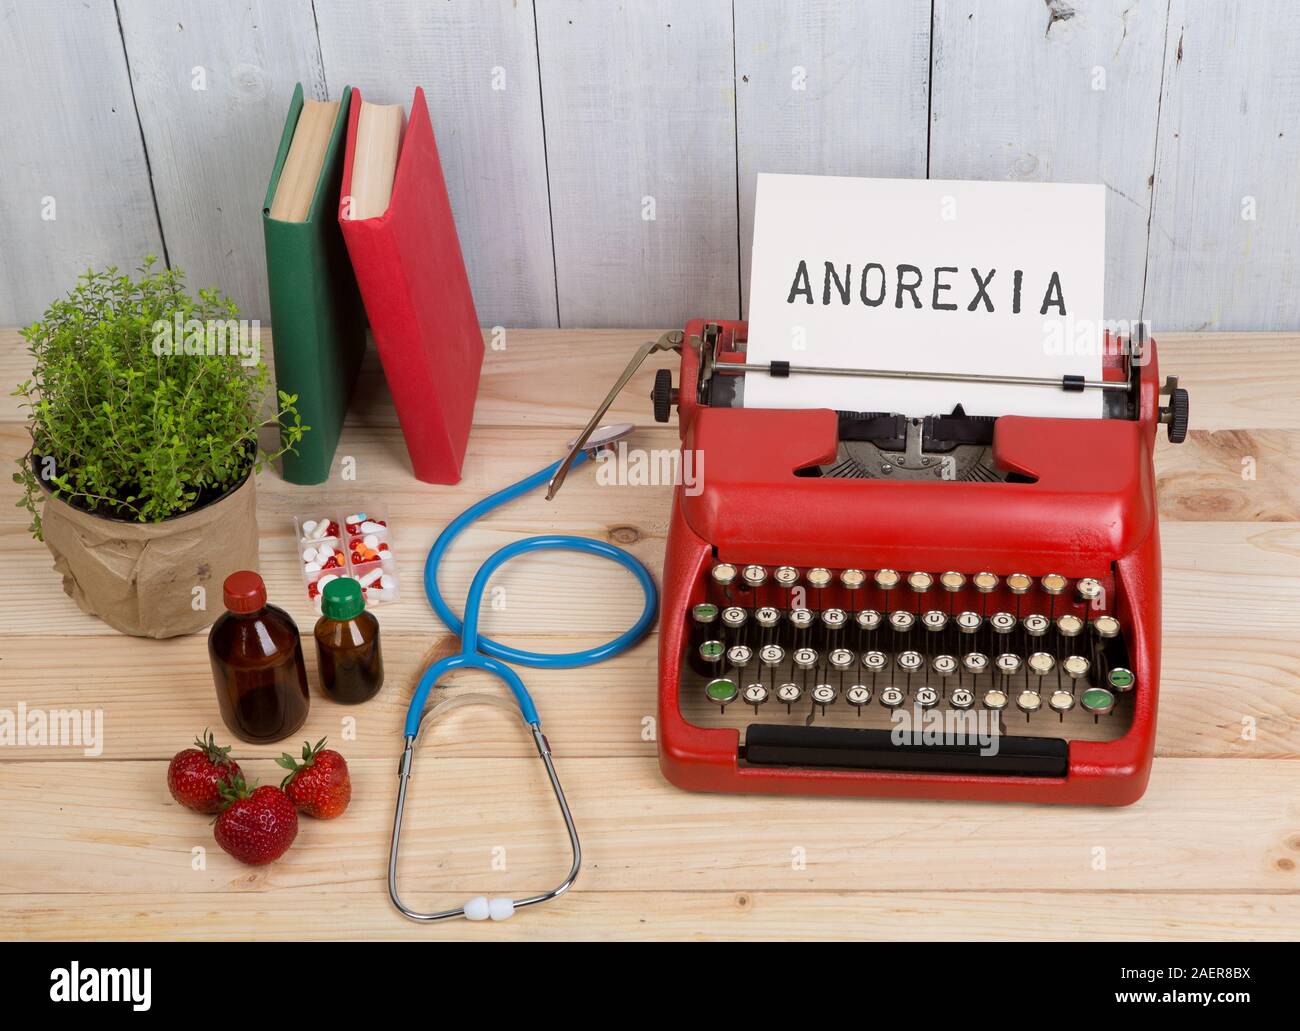 Eating disorder concept - typewriter with text Anorexia, blue stethoscope, pills, red typewriter, strawberries on wooden table Stock Photo